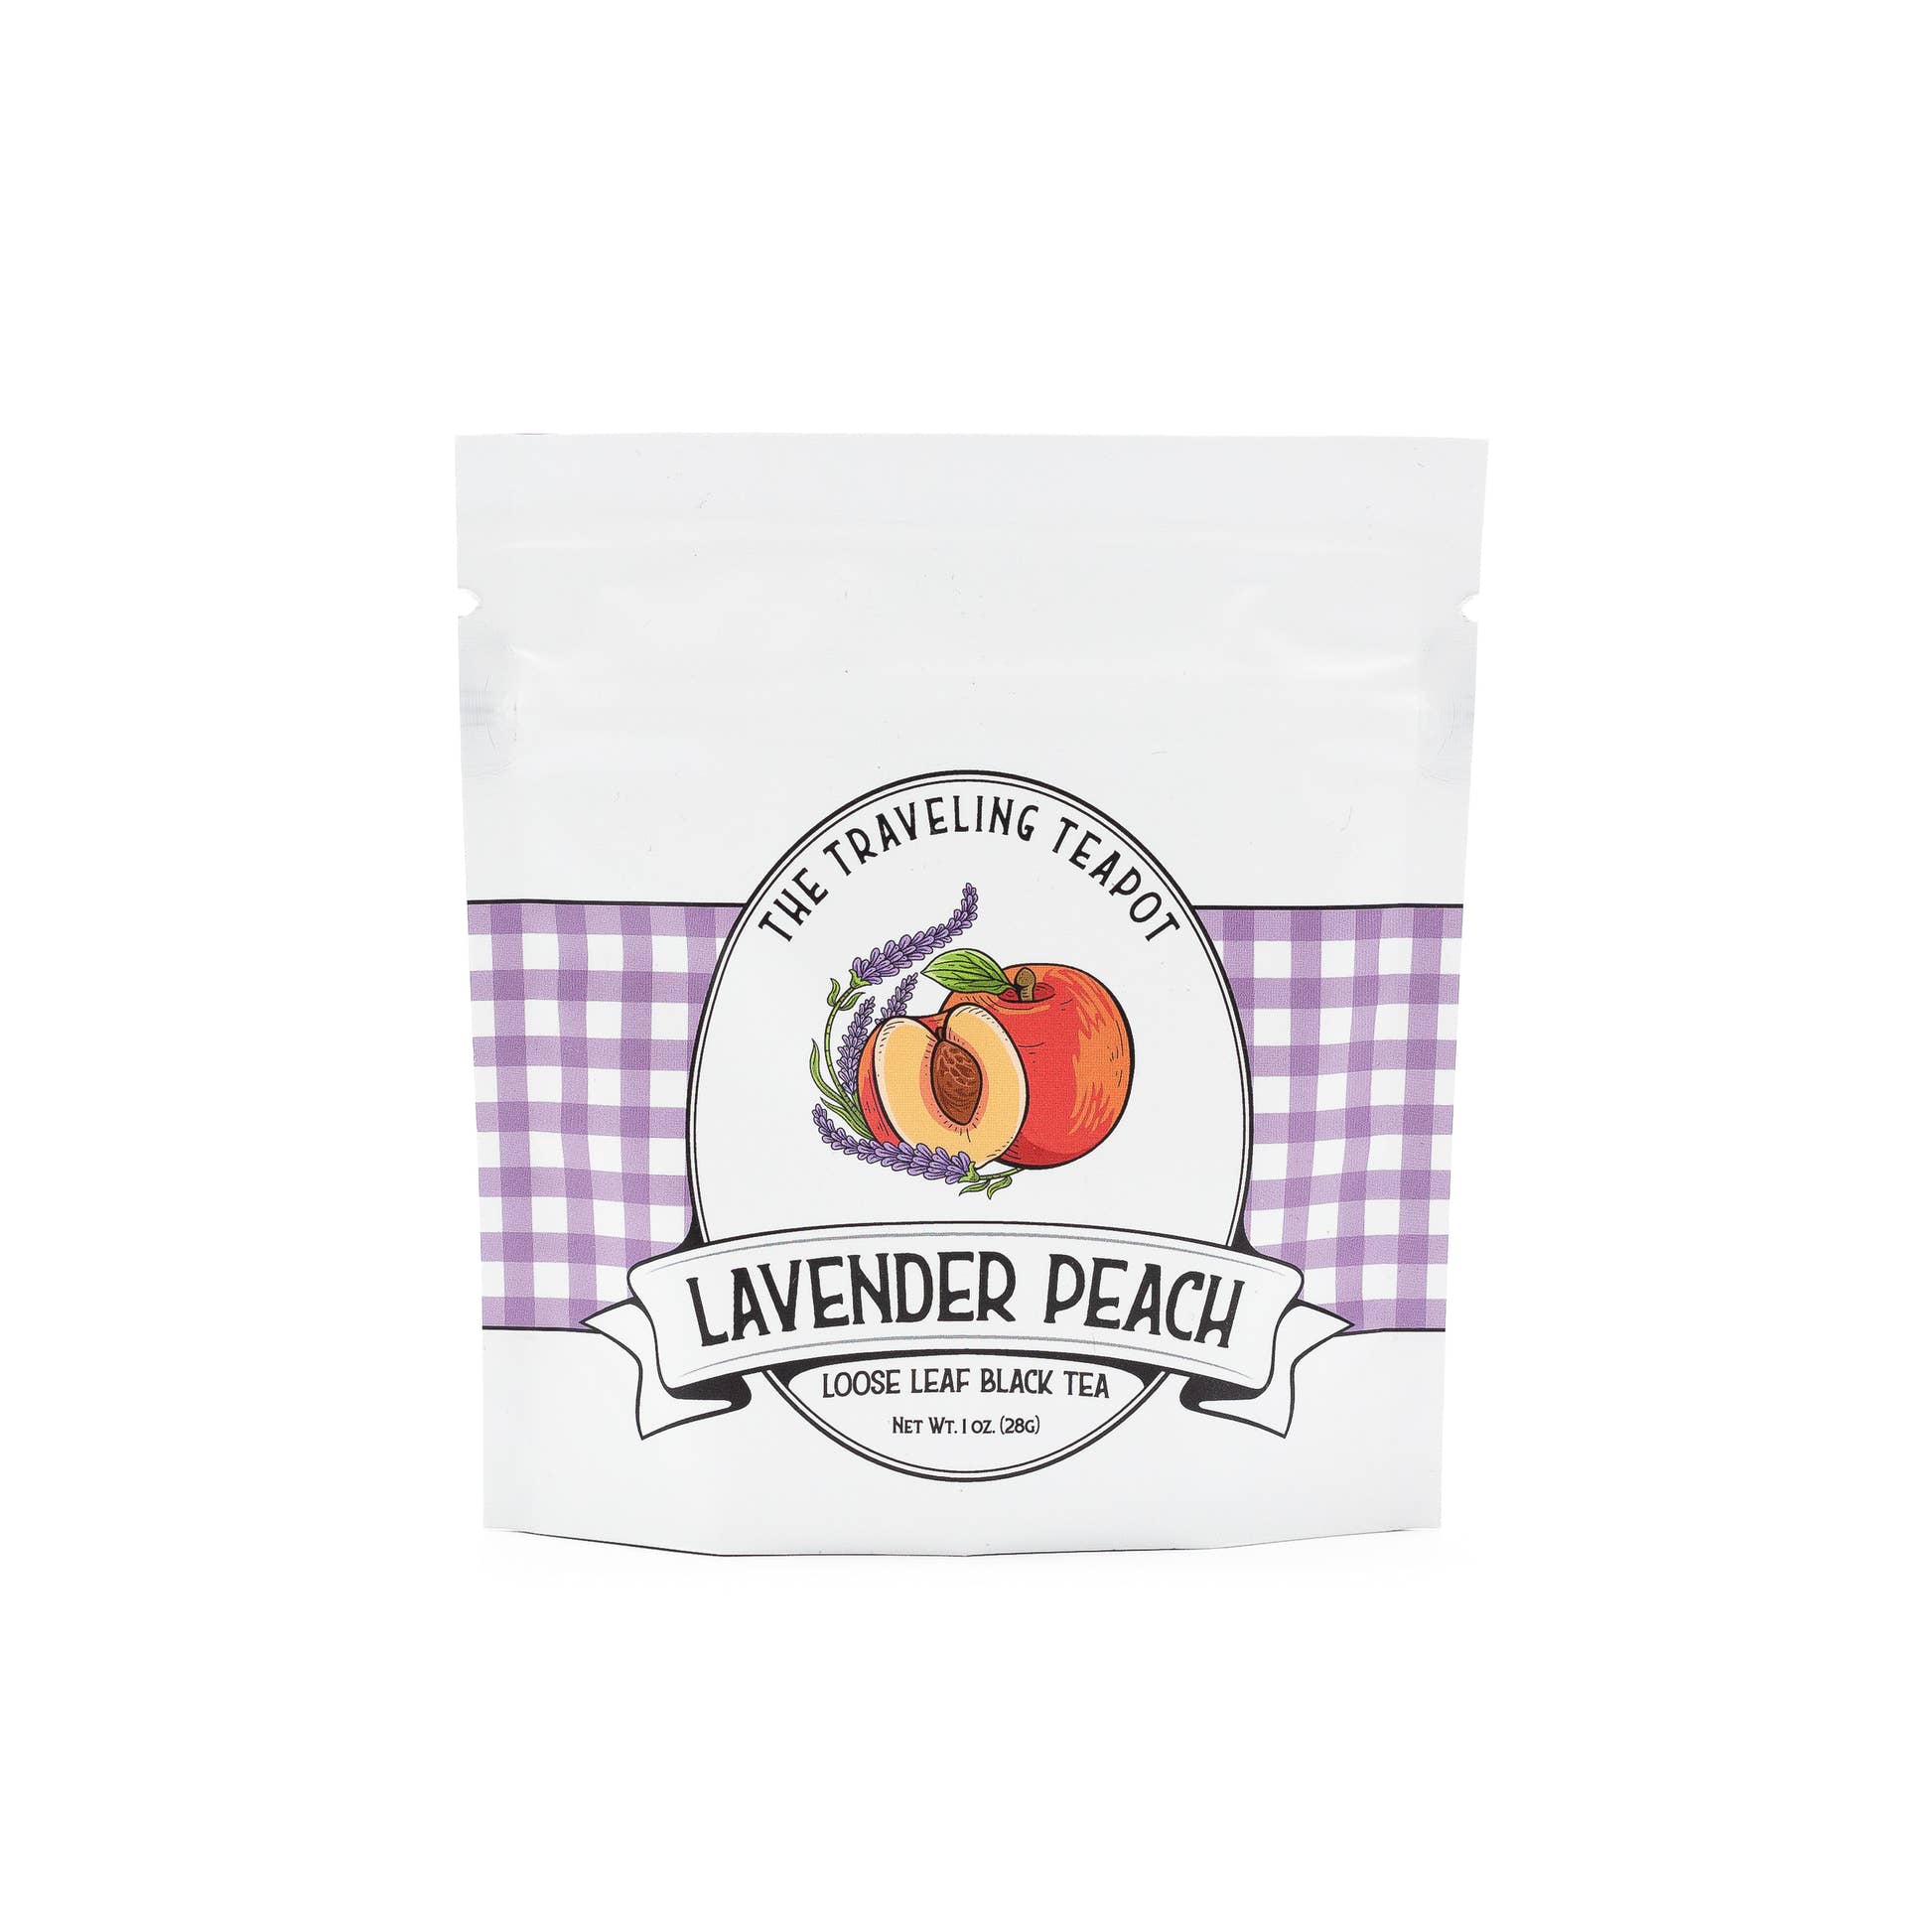 Lavender Peach black tea blend by The Traveling Teapot white and purple gingham printed loose leaf tea pouch with a peach and lavender illustration